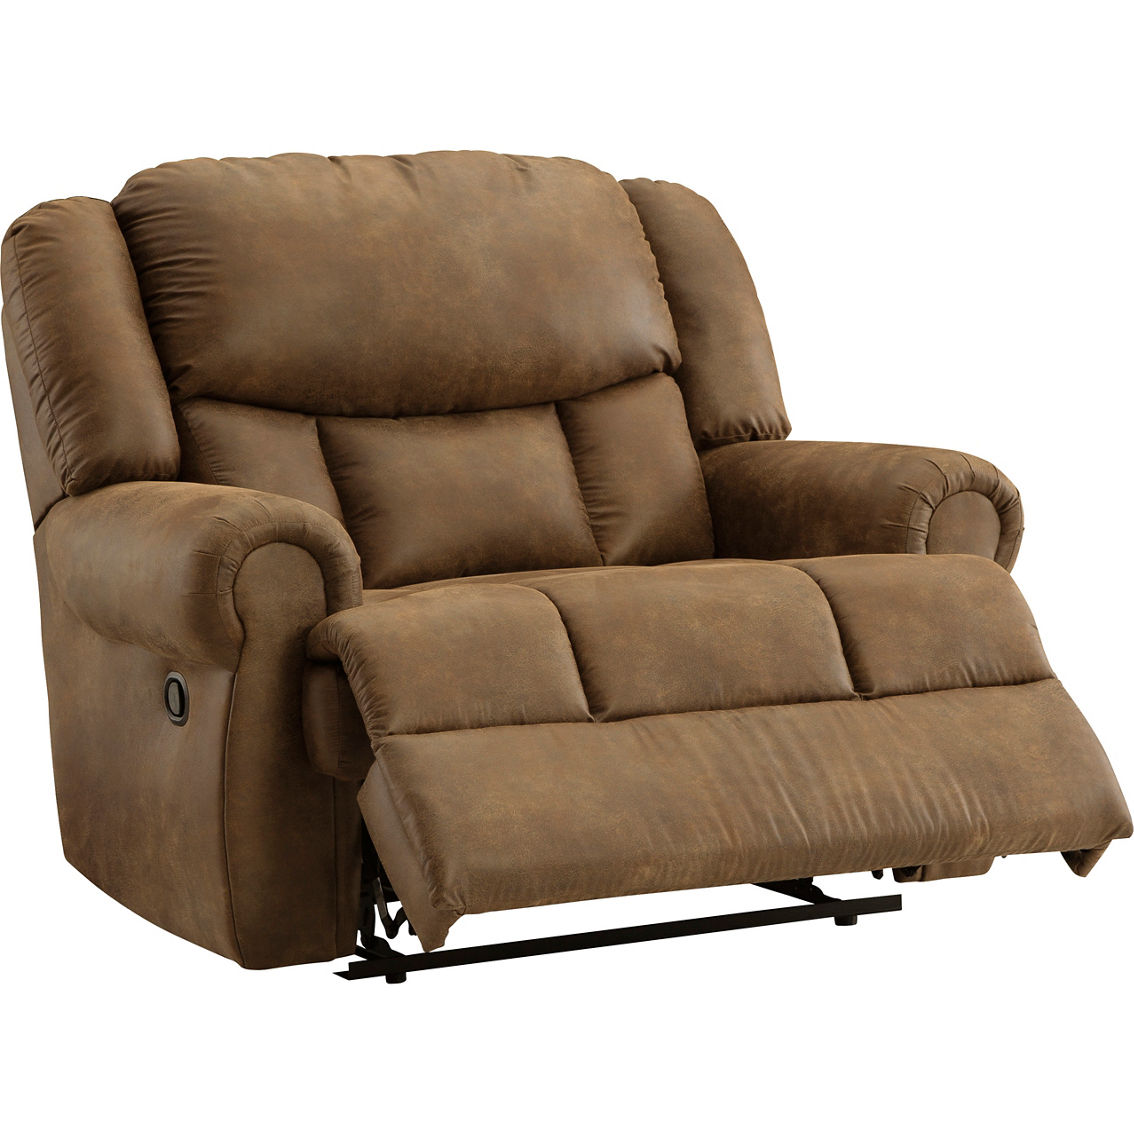 Signature Design by Ashley Boothbay Oversized Recliner - Image 4 of 8